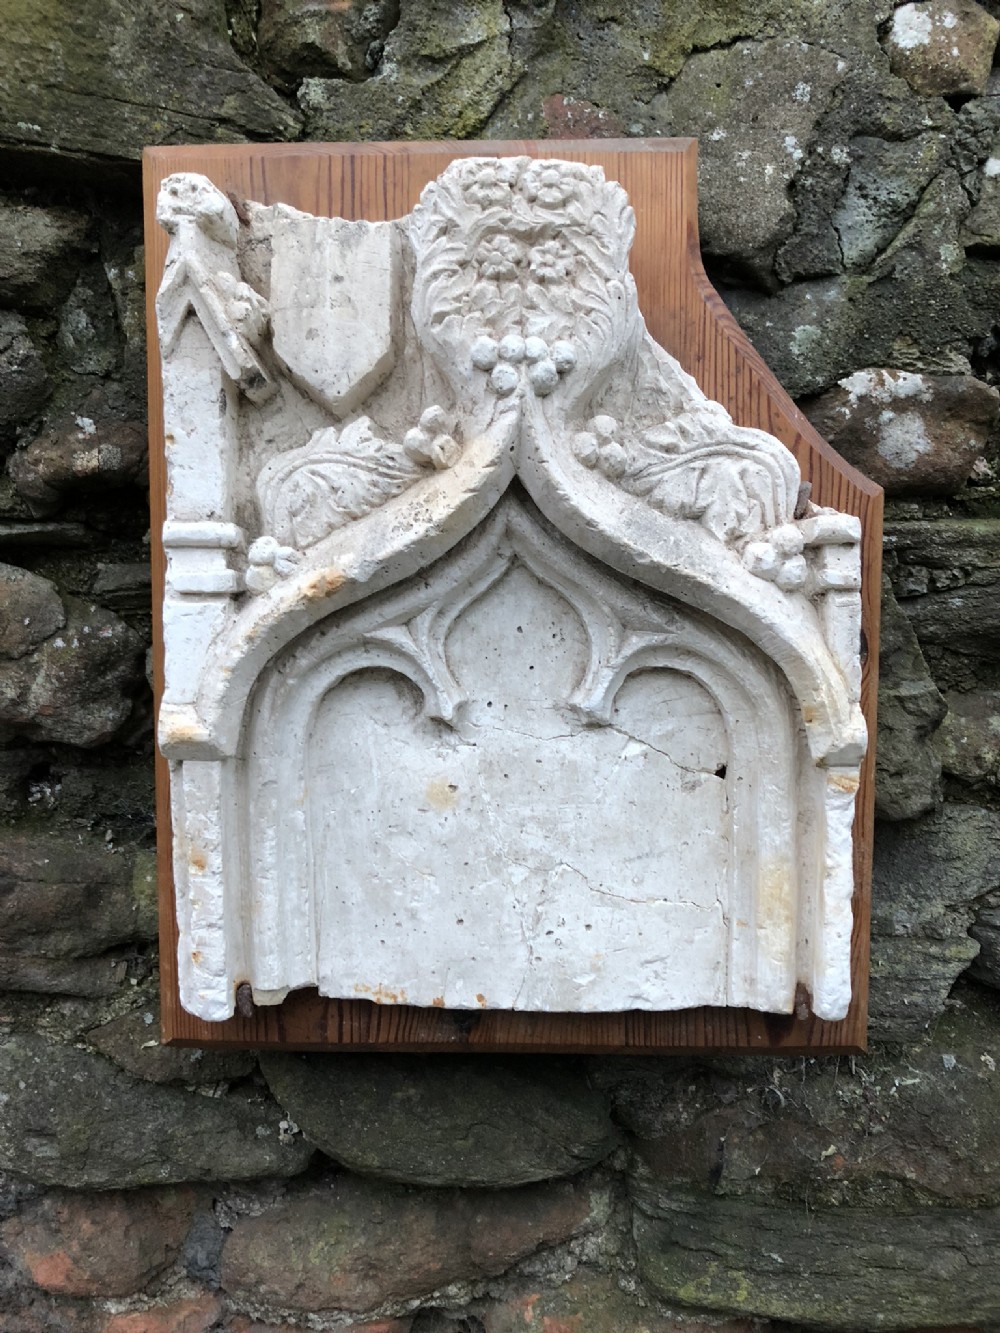 c19th mounted plaster cast of early gothic architectural fragment